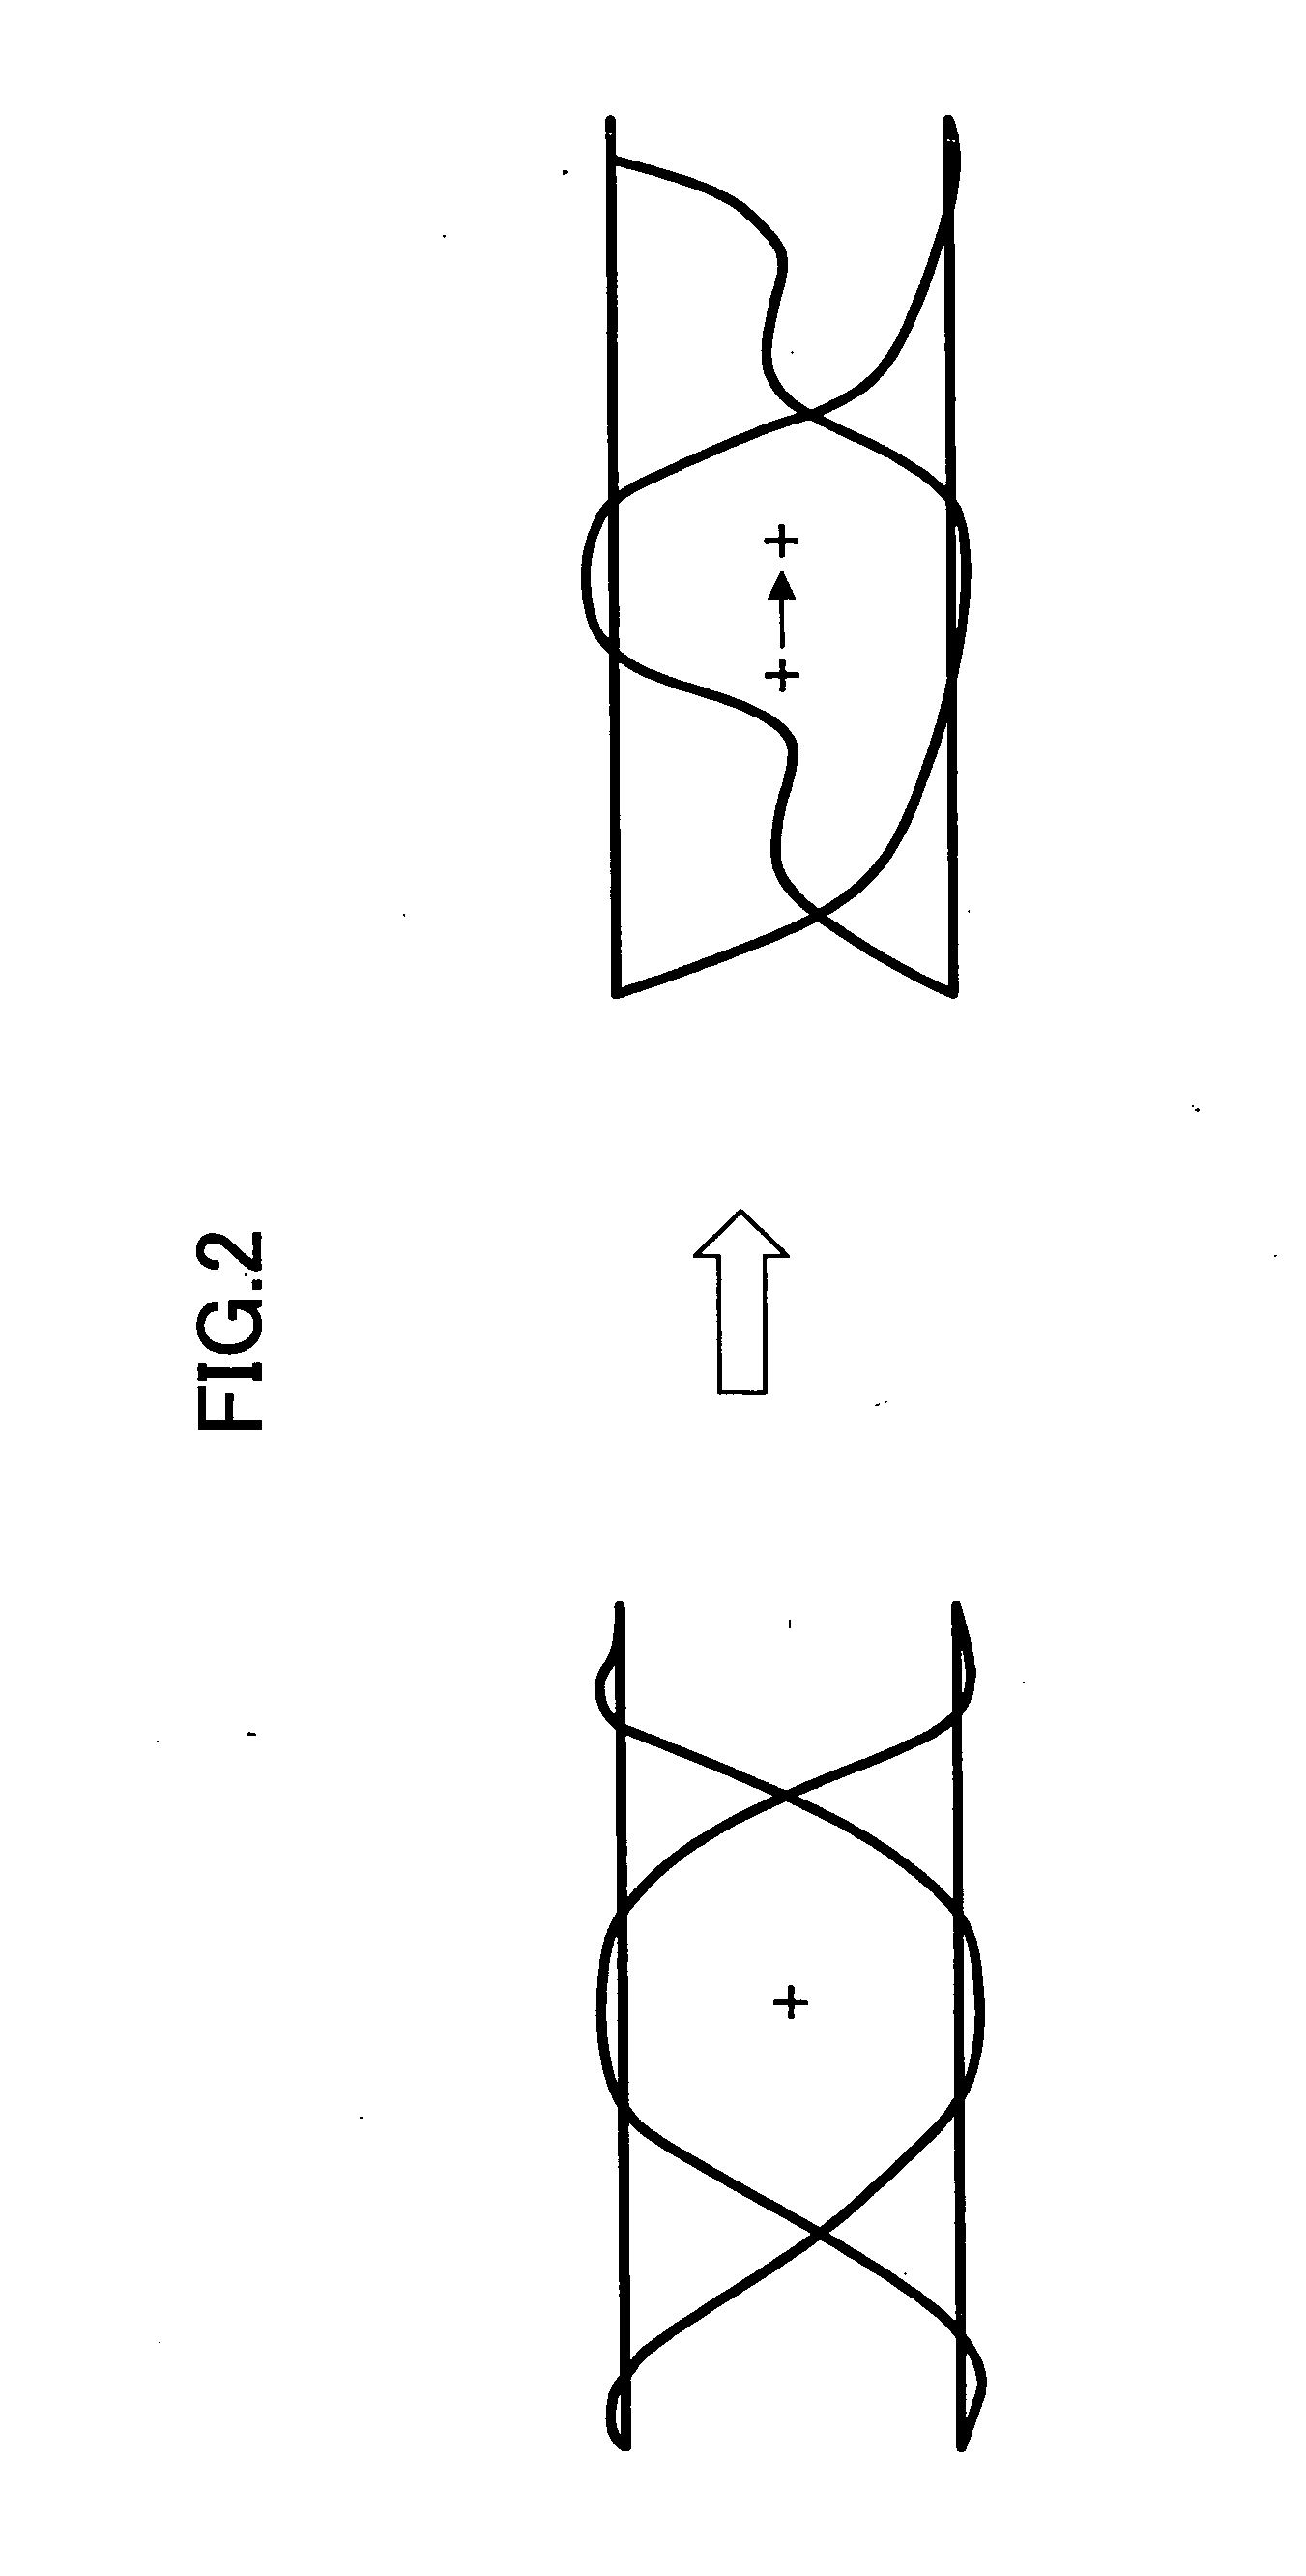 Digital signal receiving apparatus, an optical transmission apparatus therewith, and a discriminating point control method